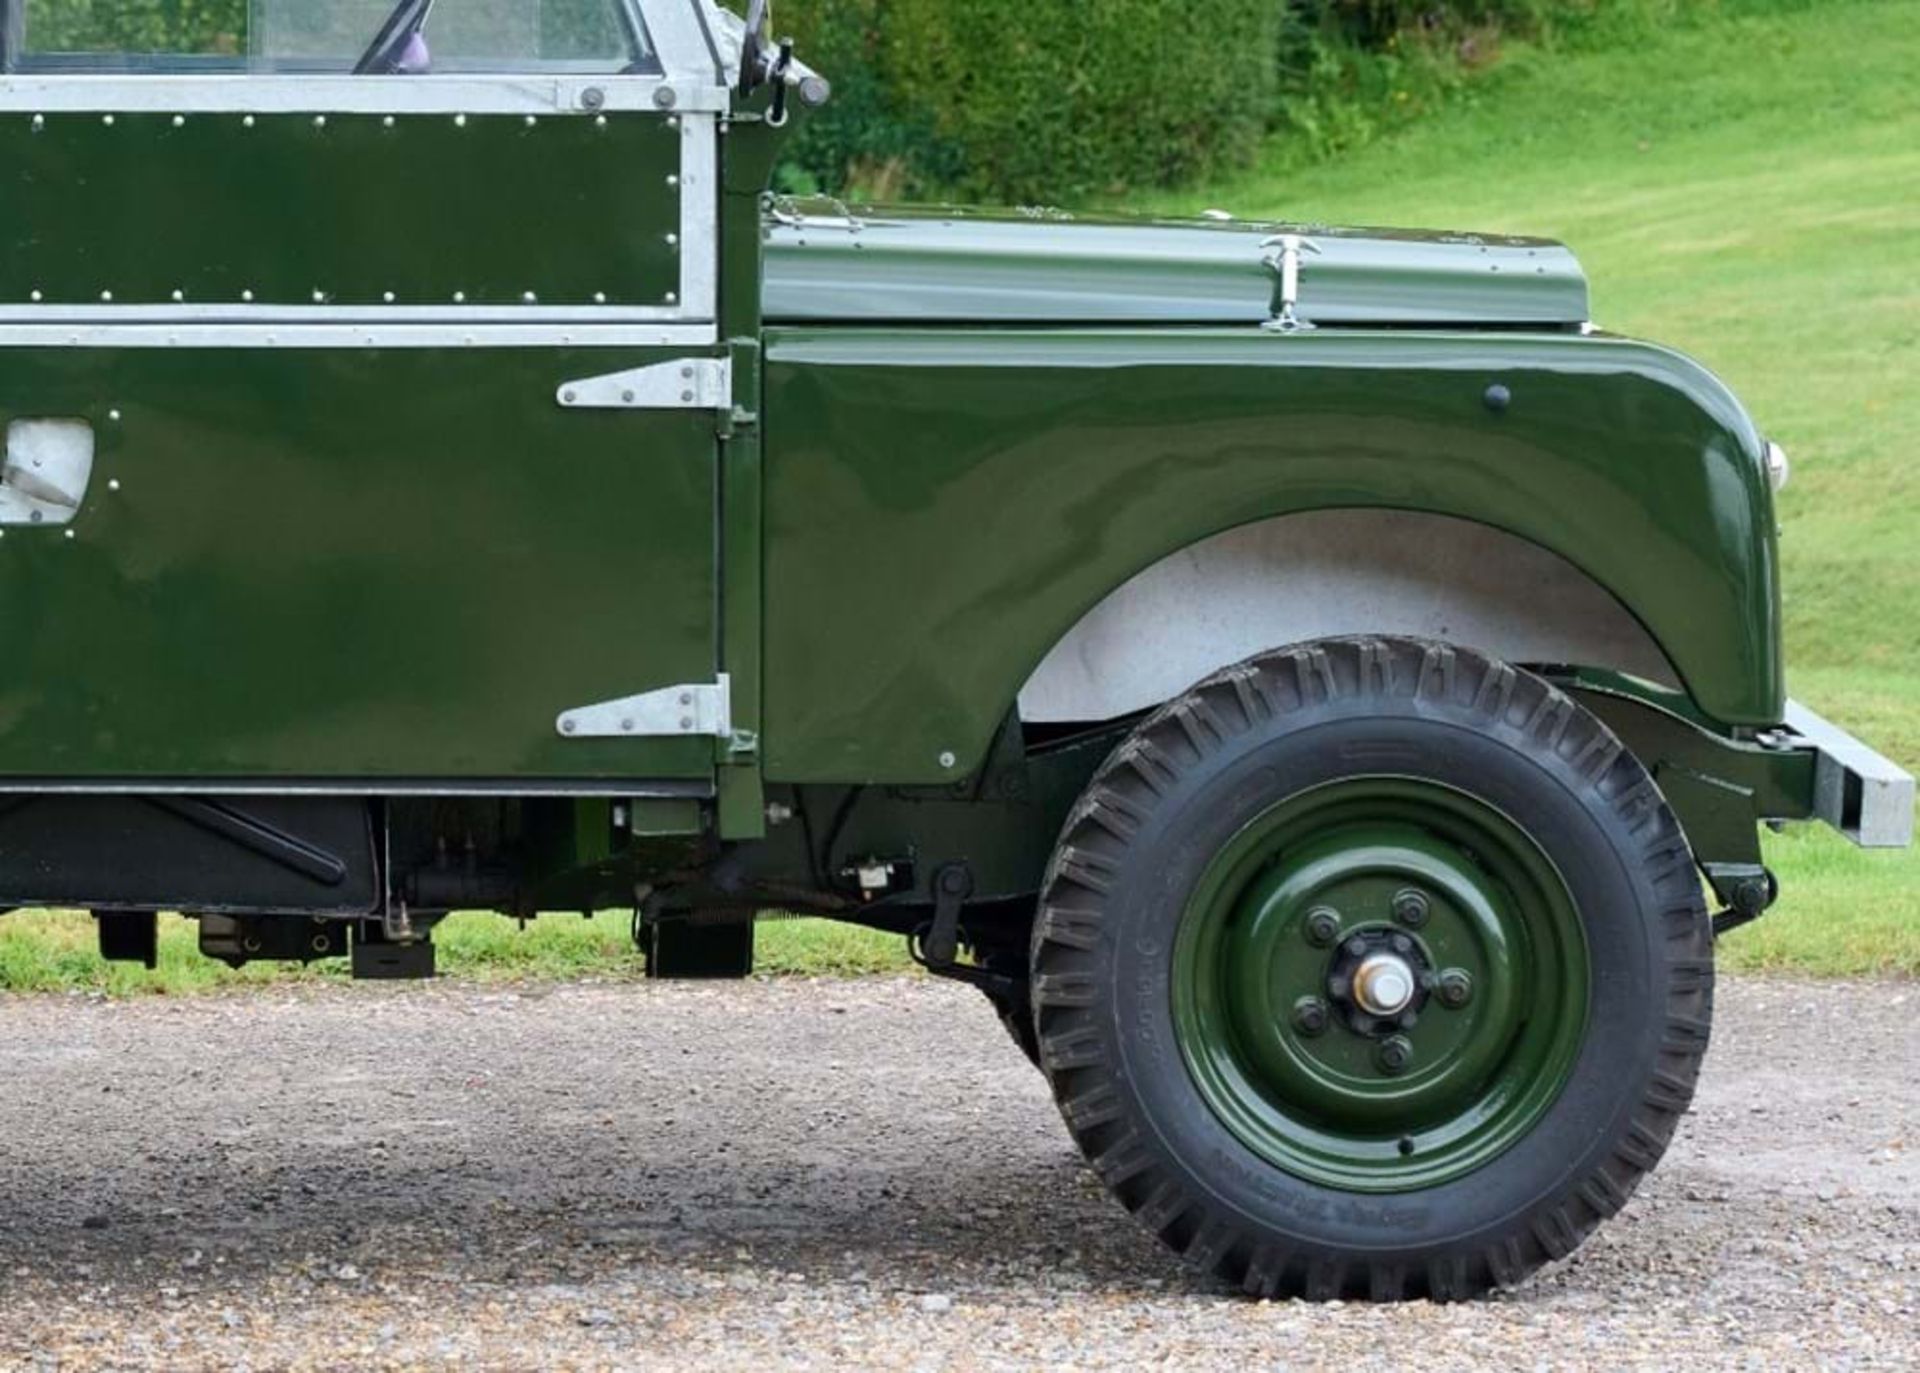 1954 Land Rover Series I (86") - Image 8 of 10